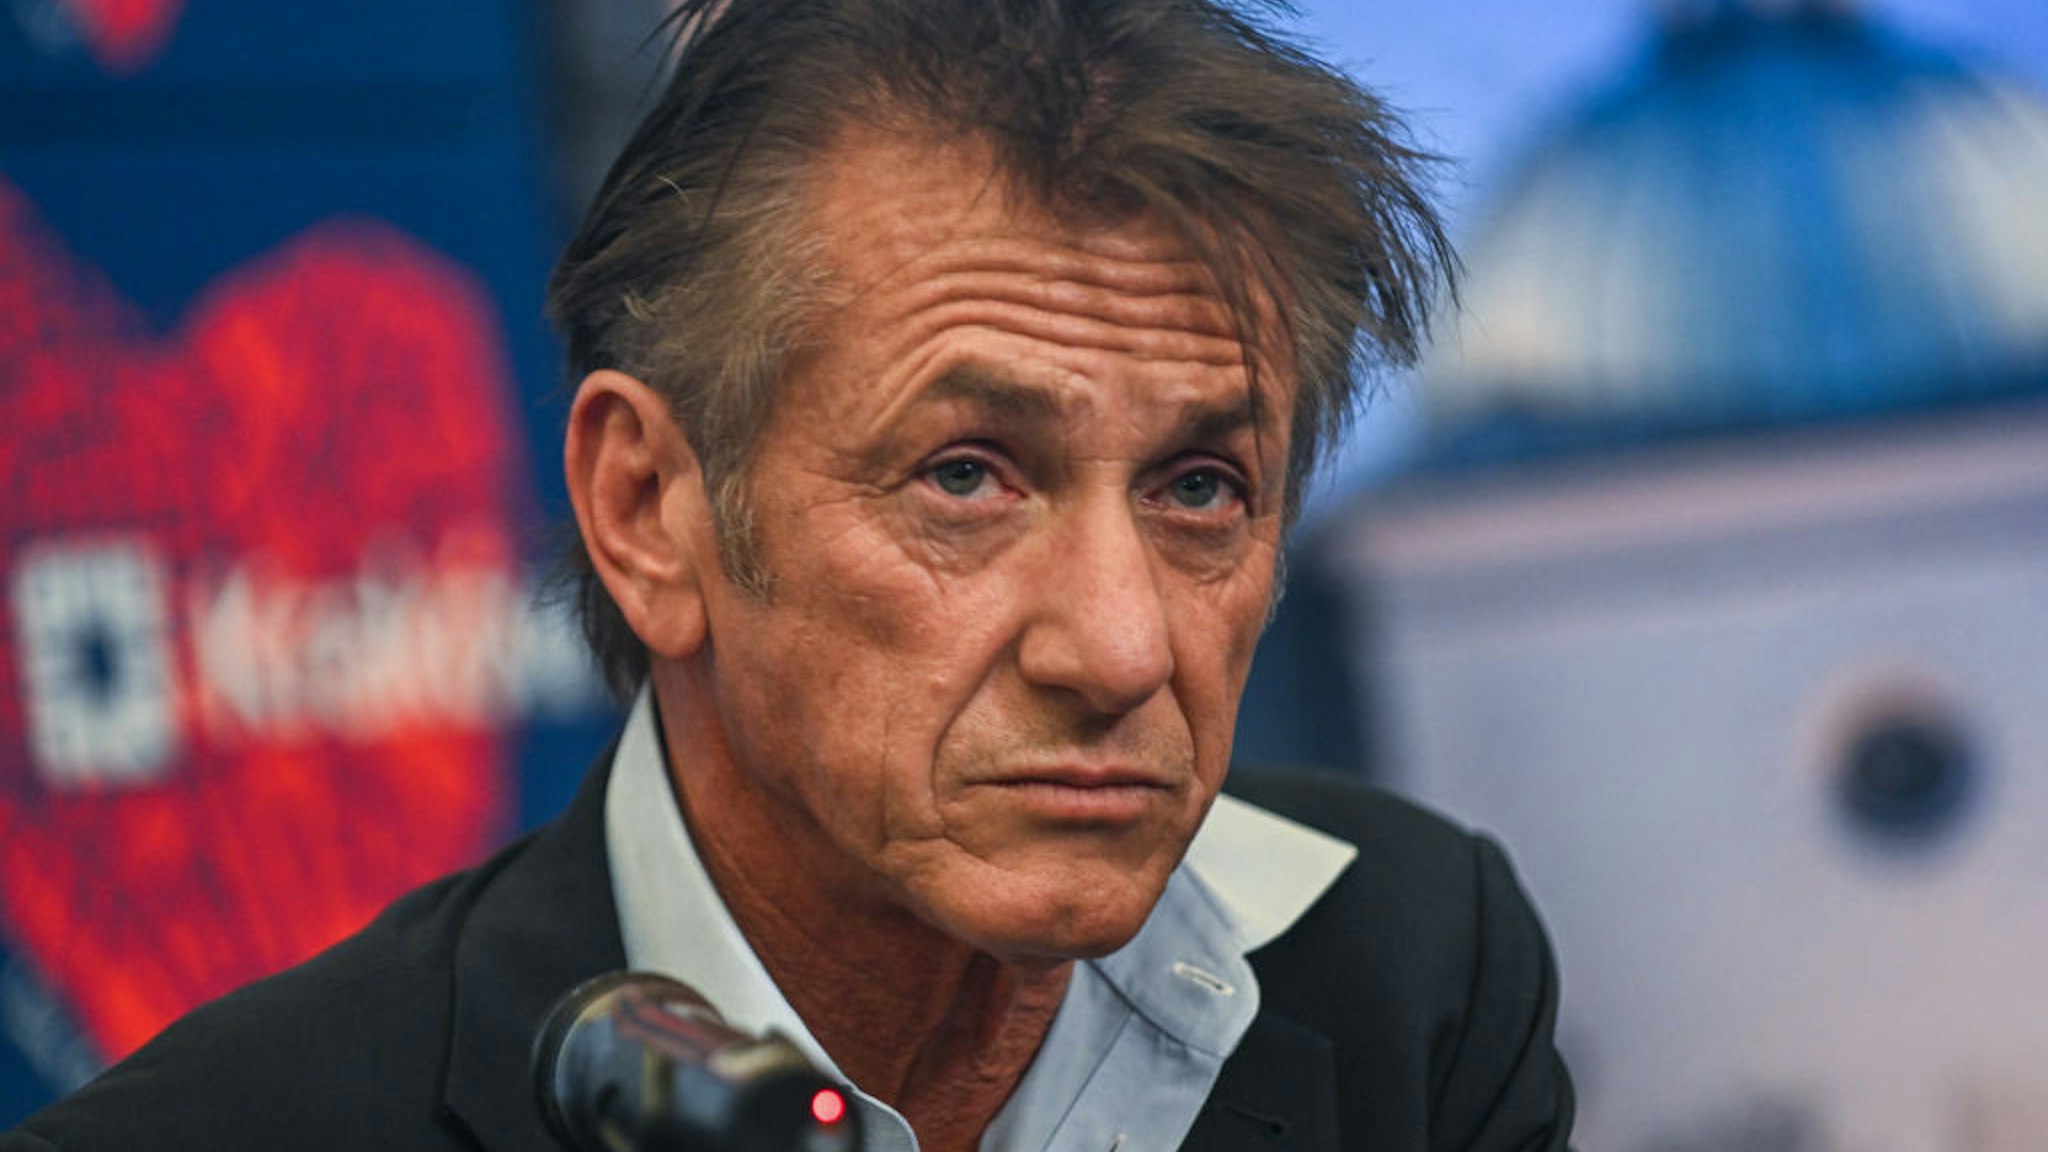 KRAKOW, POLAND - MARCH 23: Sean Penn and the Mayor of Krakow, Jacek Majchrowski (not seen) speak to the press after signing a humanitarian contract at the City Hall on March 23, 2022 in Krakow, Poland. Sean Penn founded the CORE (Community Organized Relief Effort) foundation in 2010 to help the victims of the Haiti earthquake, and it is now assisting Ukrainian refugees in Poland. (Photo by Omar Marques/Getty Images)